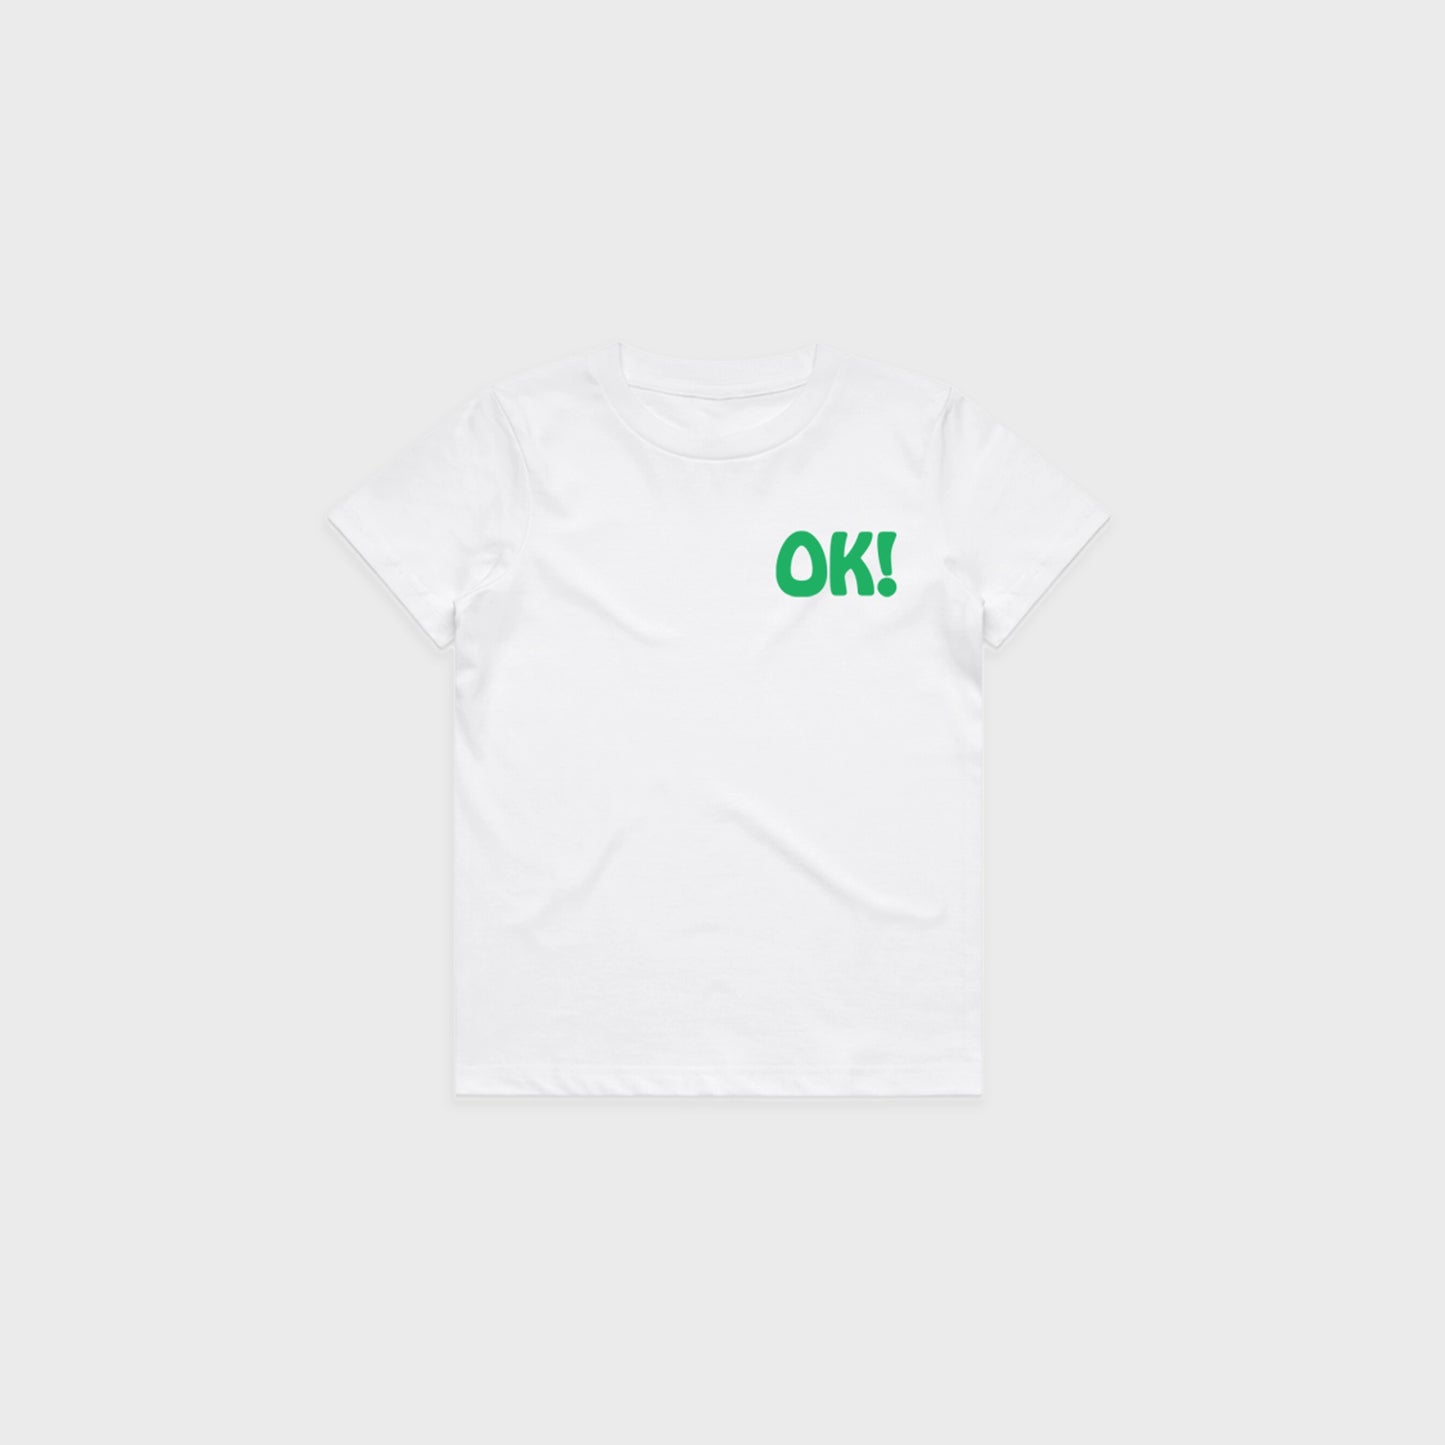 YOU'RE GONNA BE OK YOUTH TEE